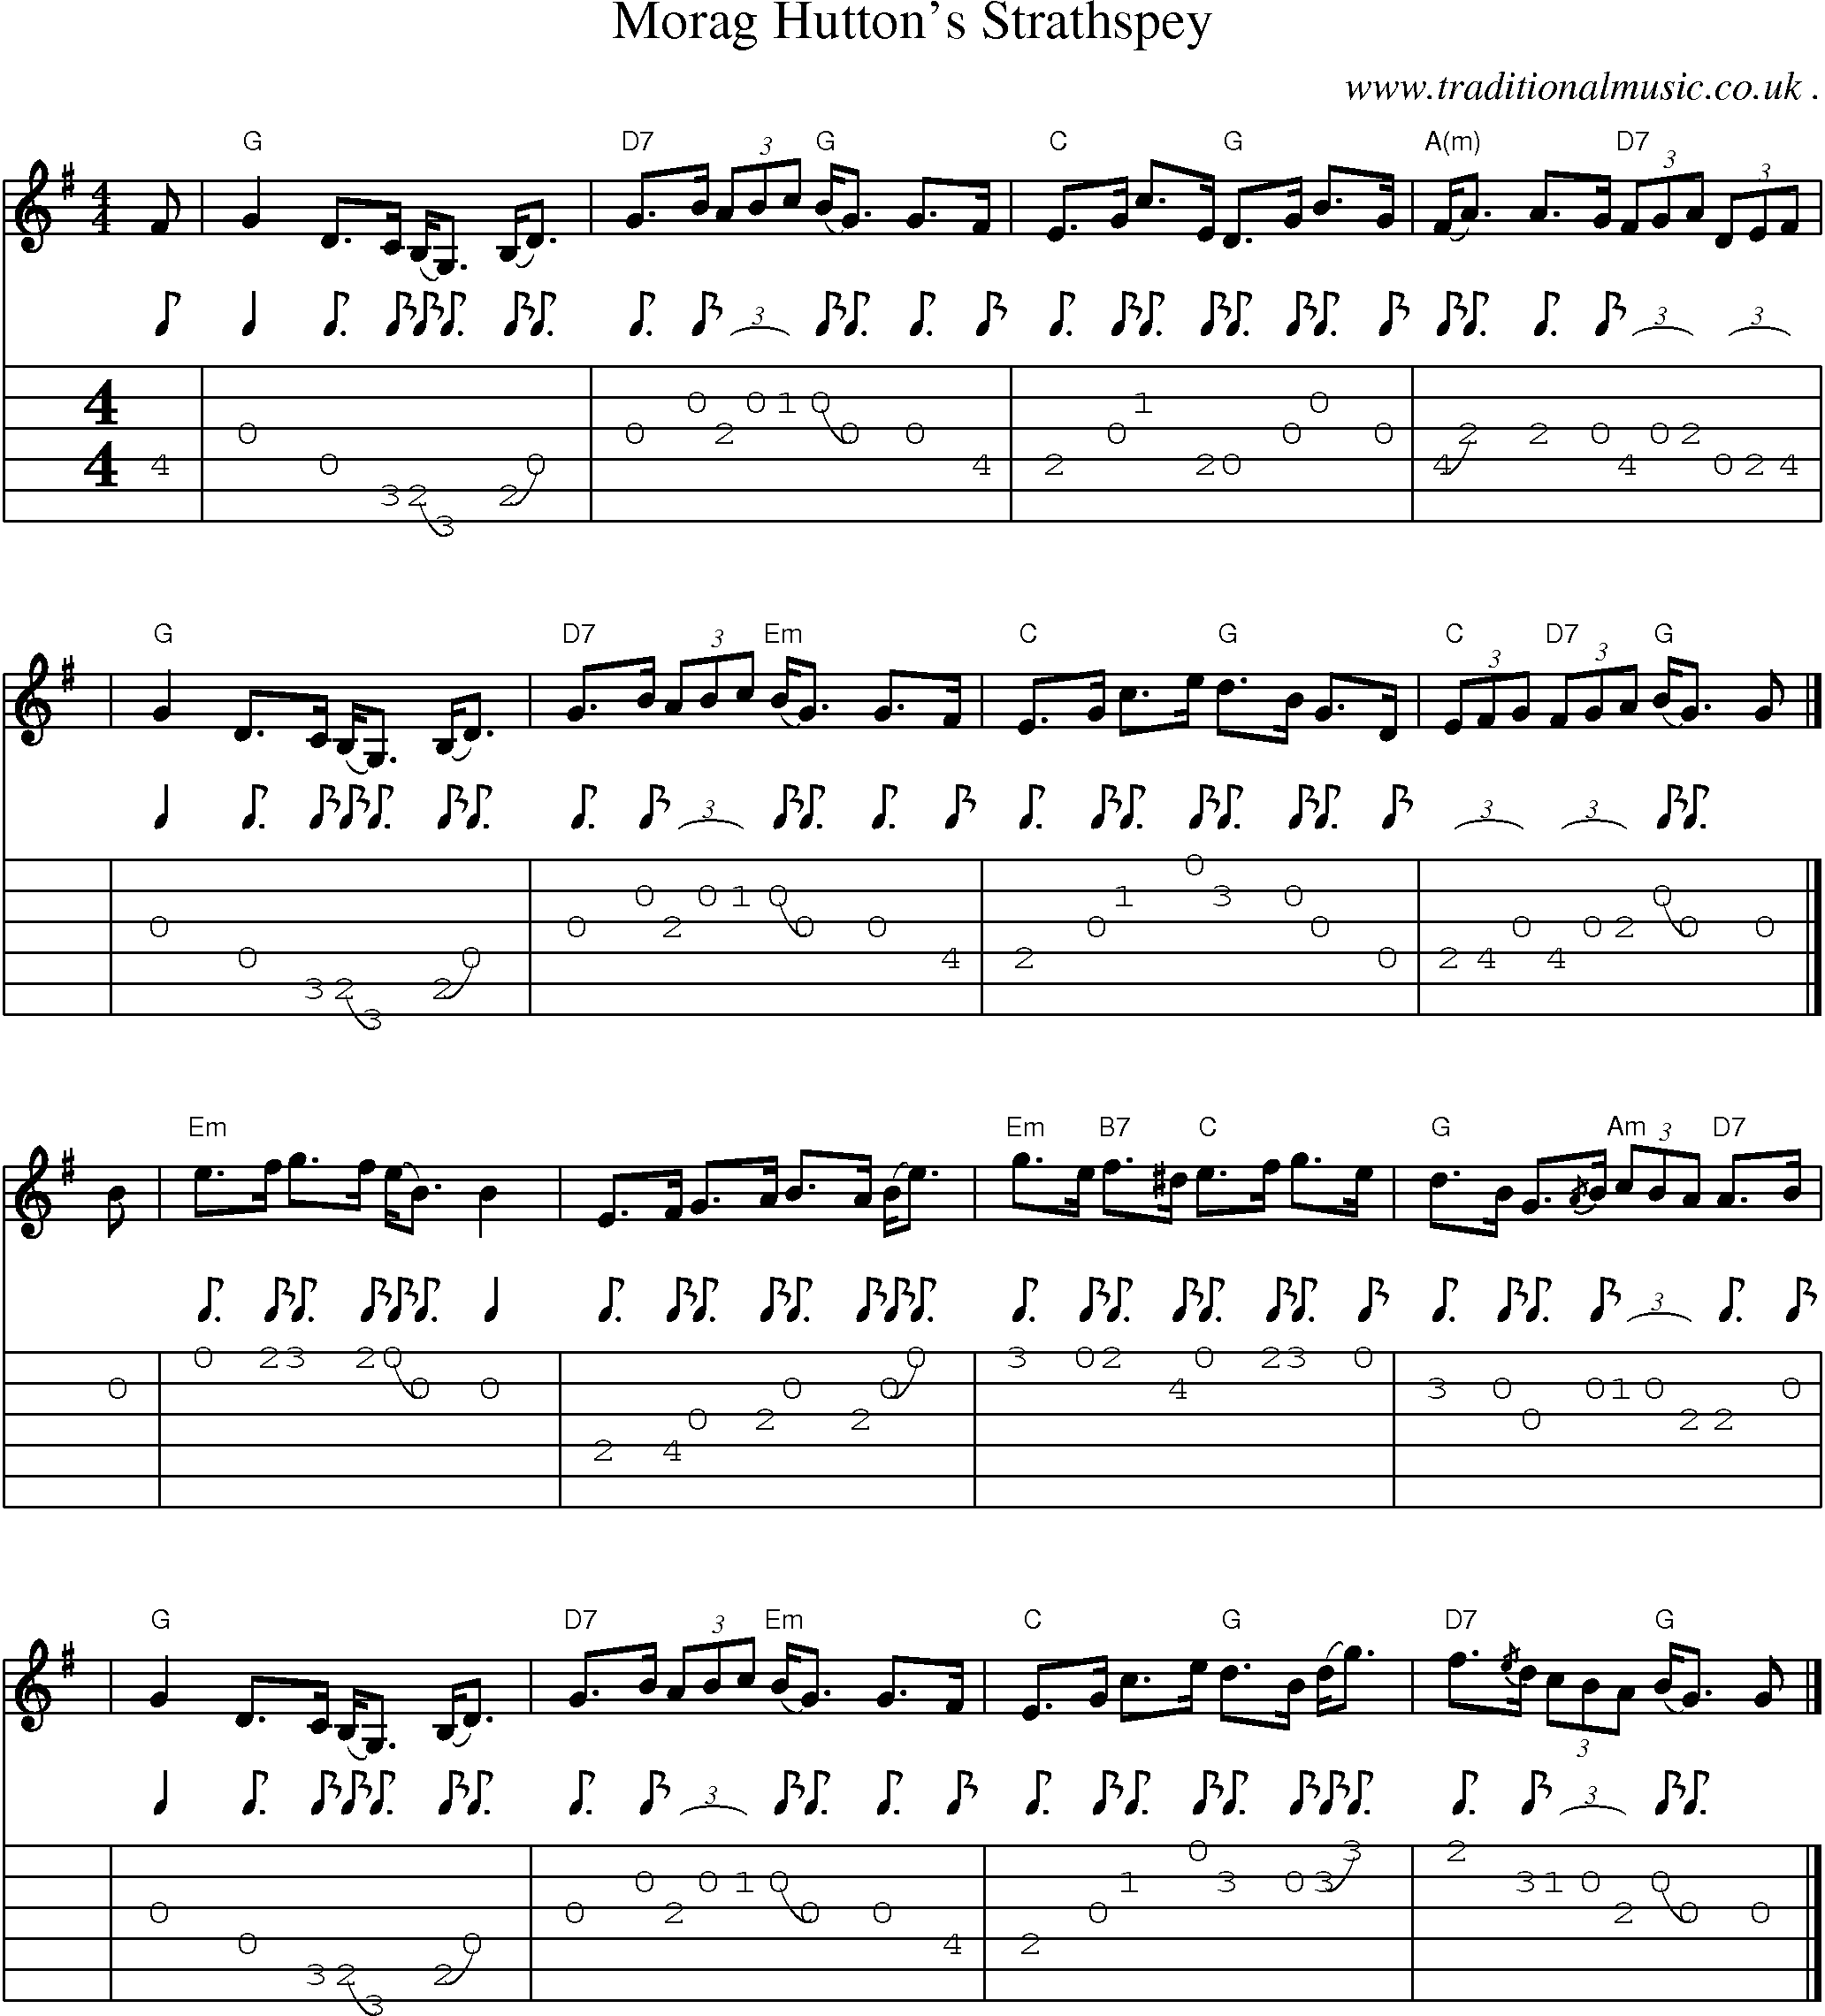 Sheet-music  score, Chords and Guitar Tabs for Morag Huttons Strathspey